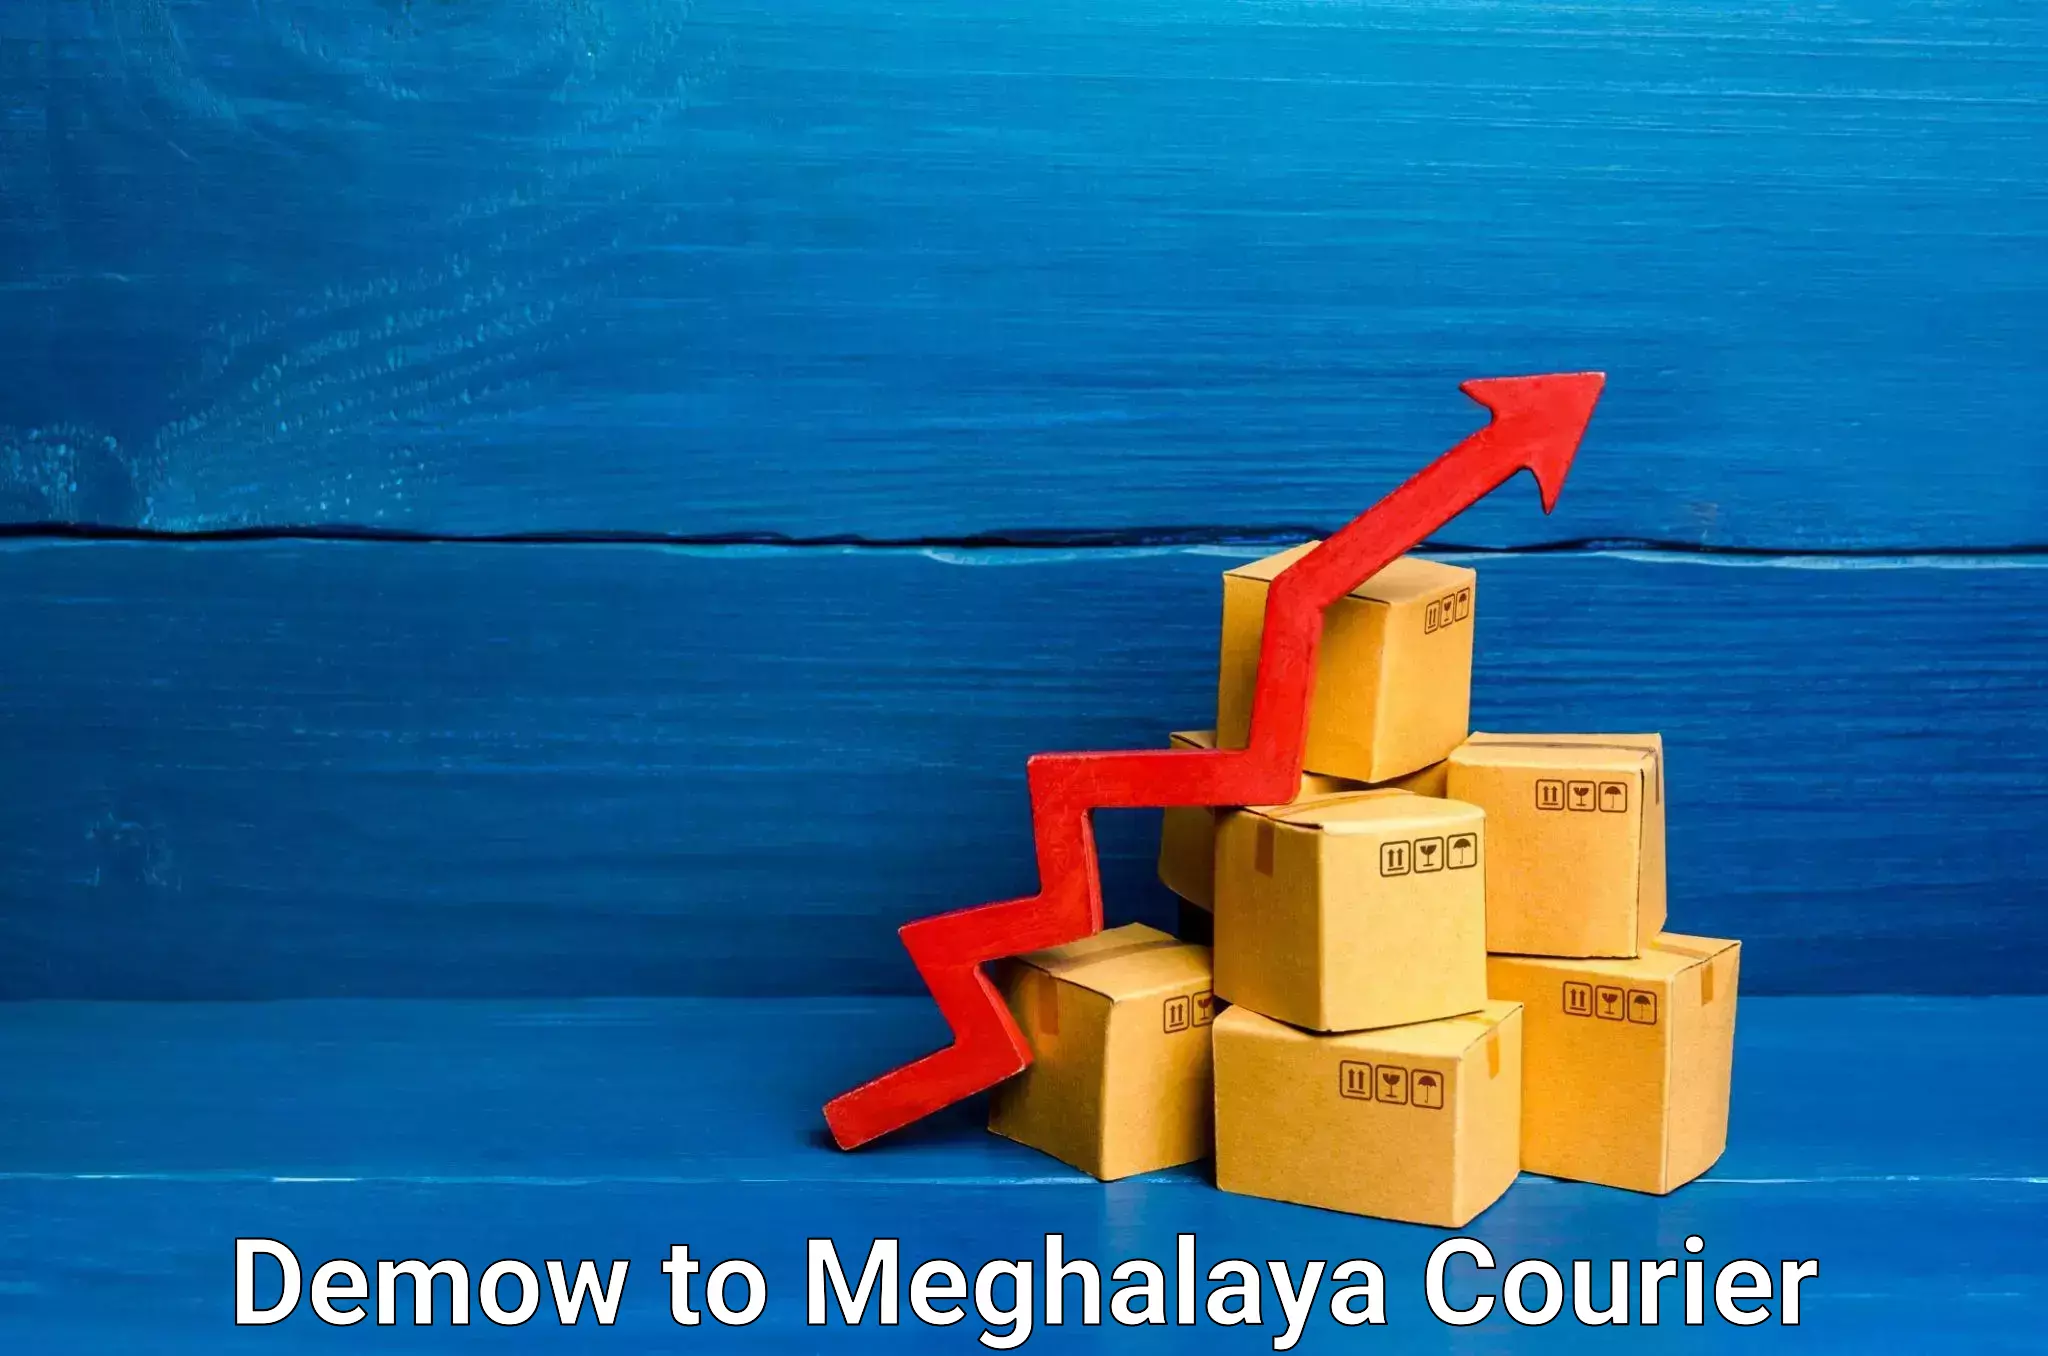 Weekend courier service Demow to Meghalaya